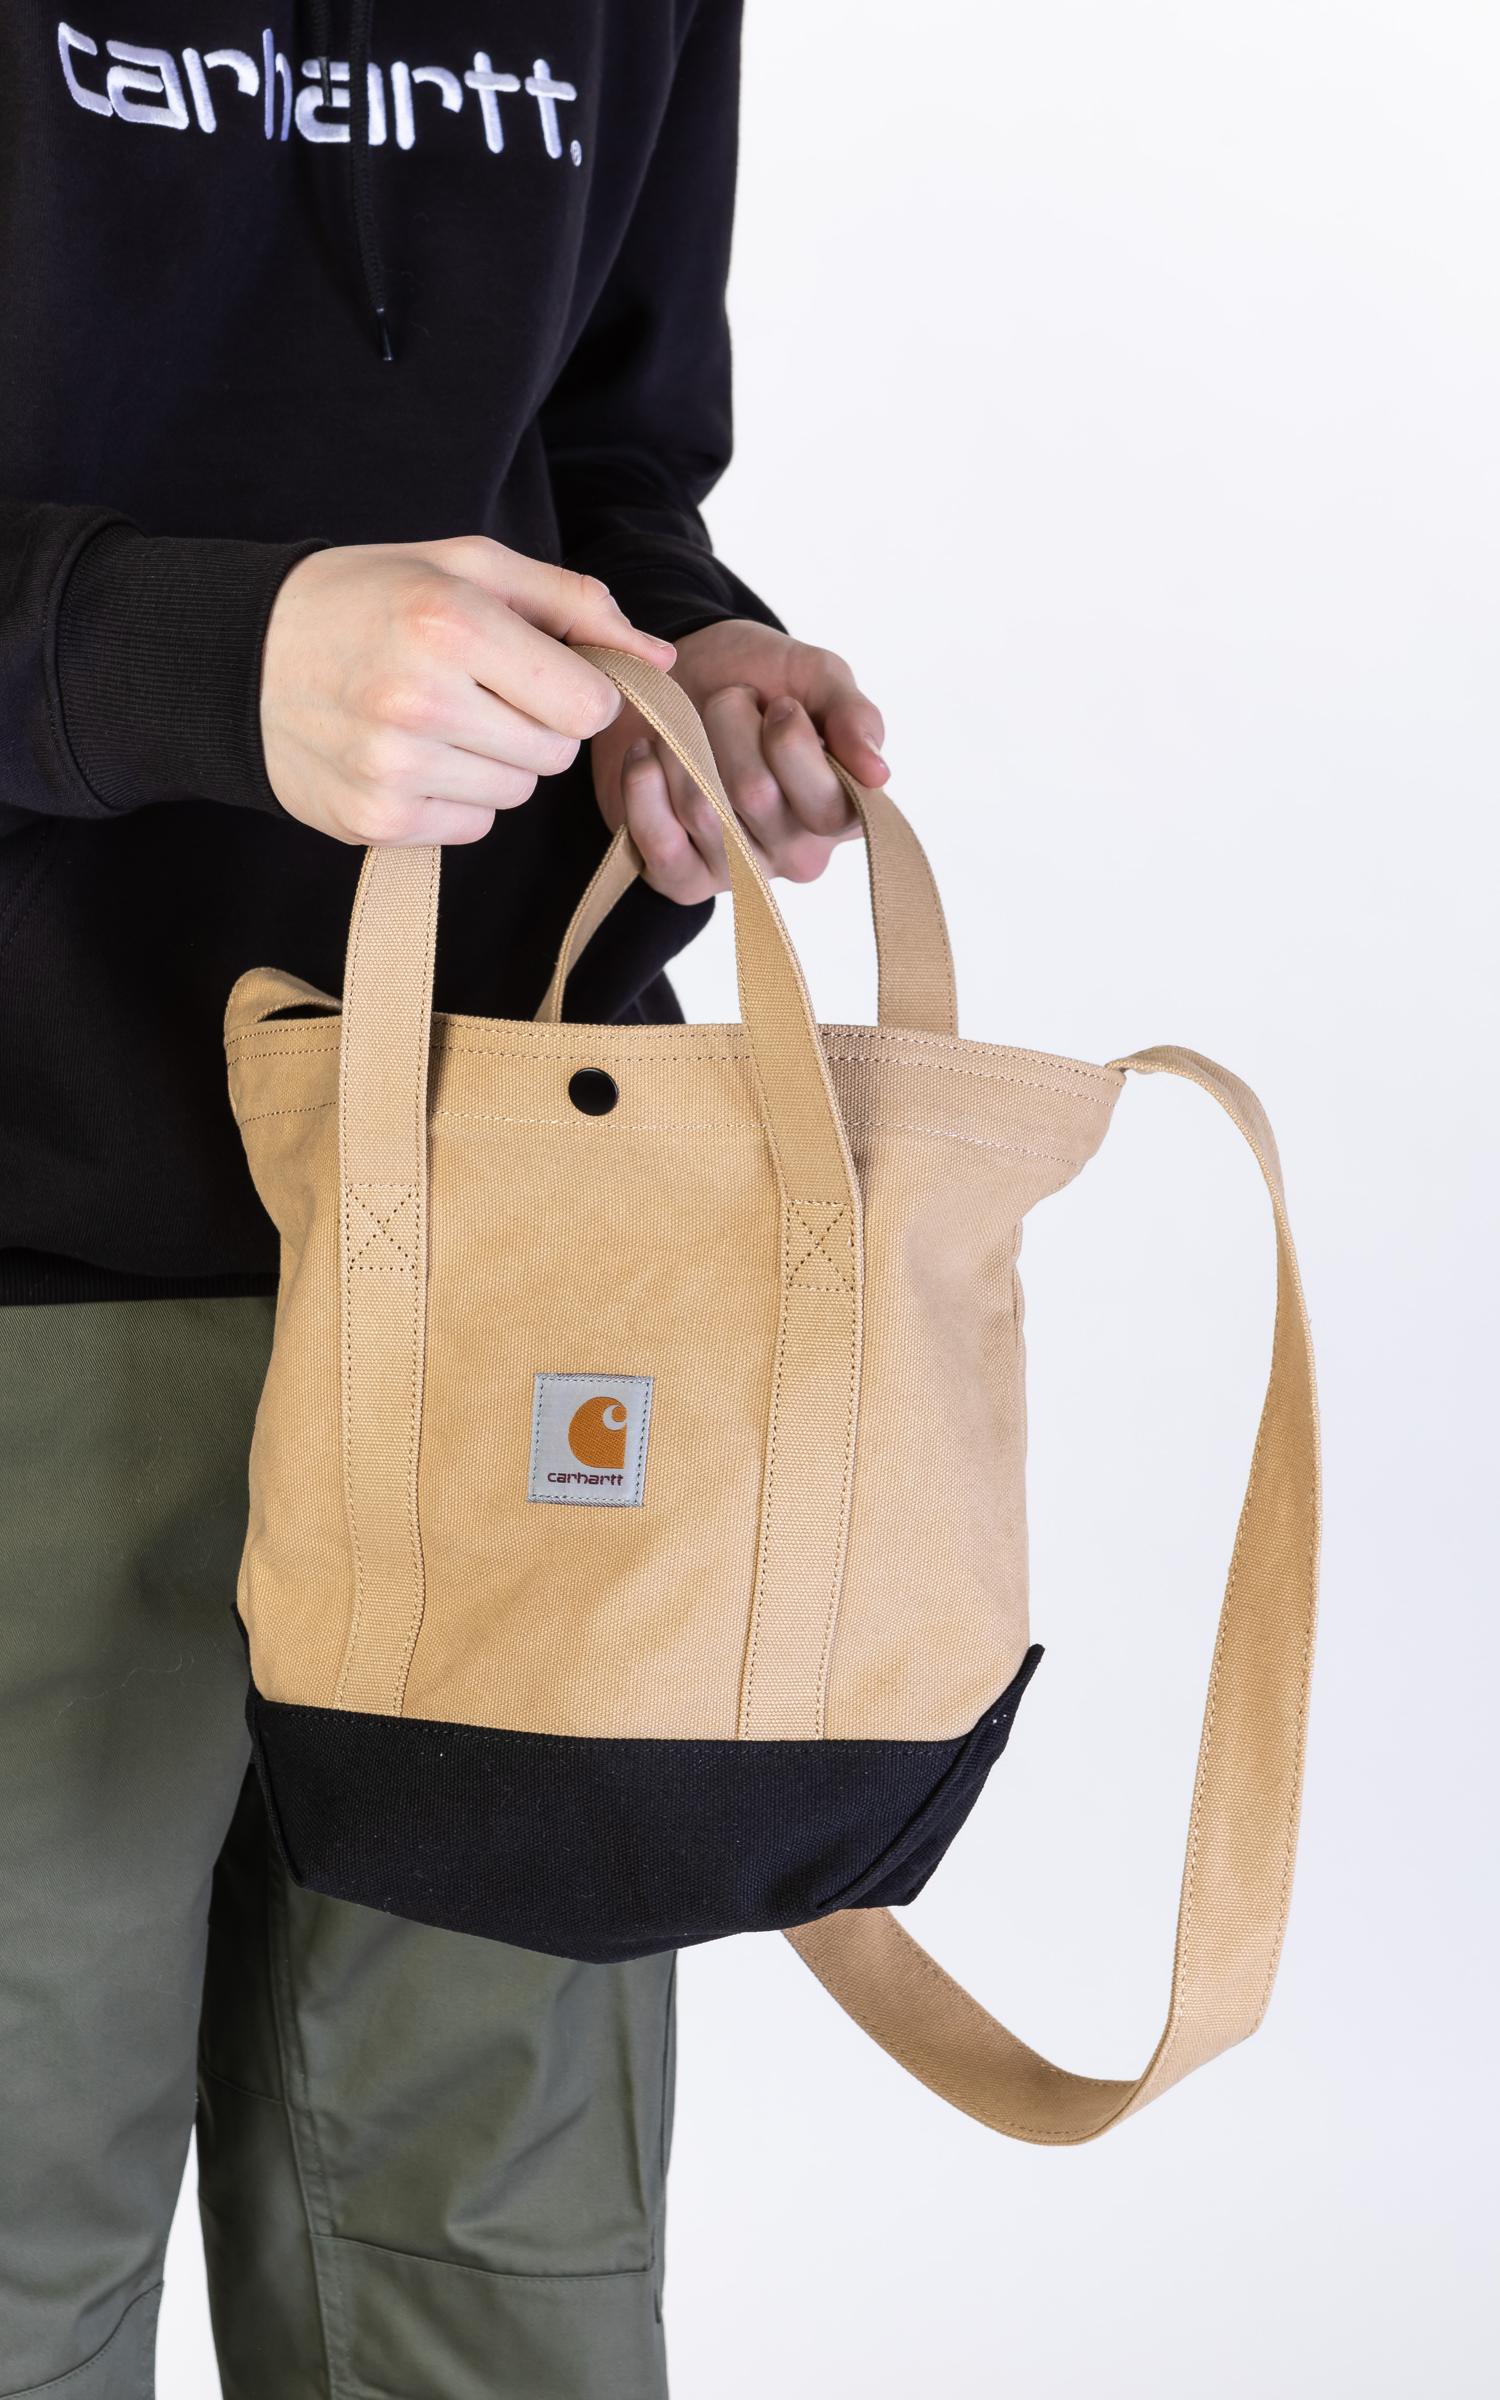 Carhartt WIP Canvas Small Tote Dusty Hamilton Brown/black for Men - Lyst